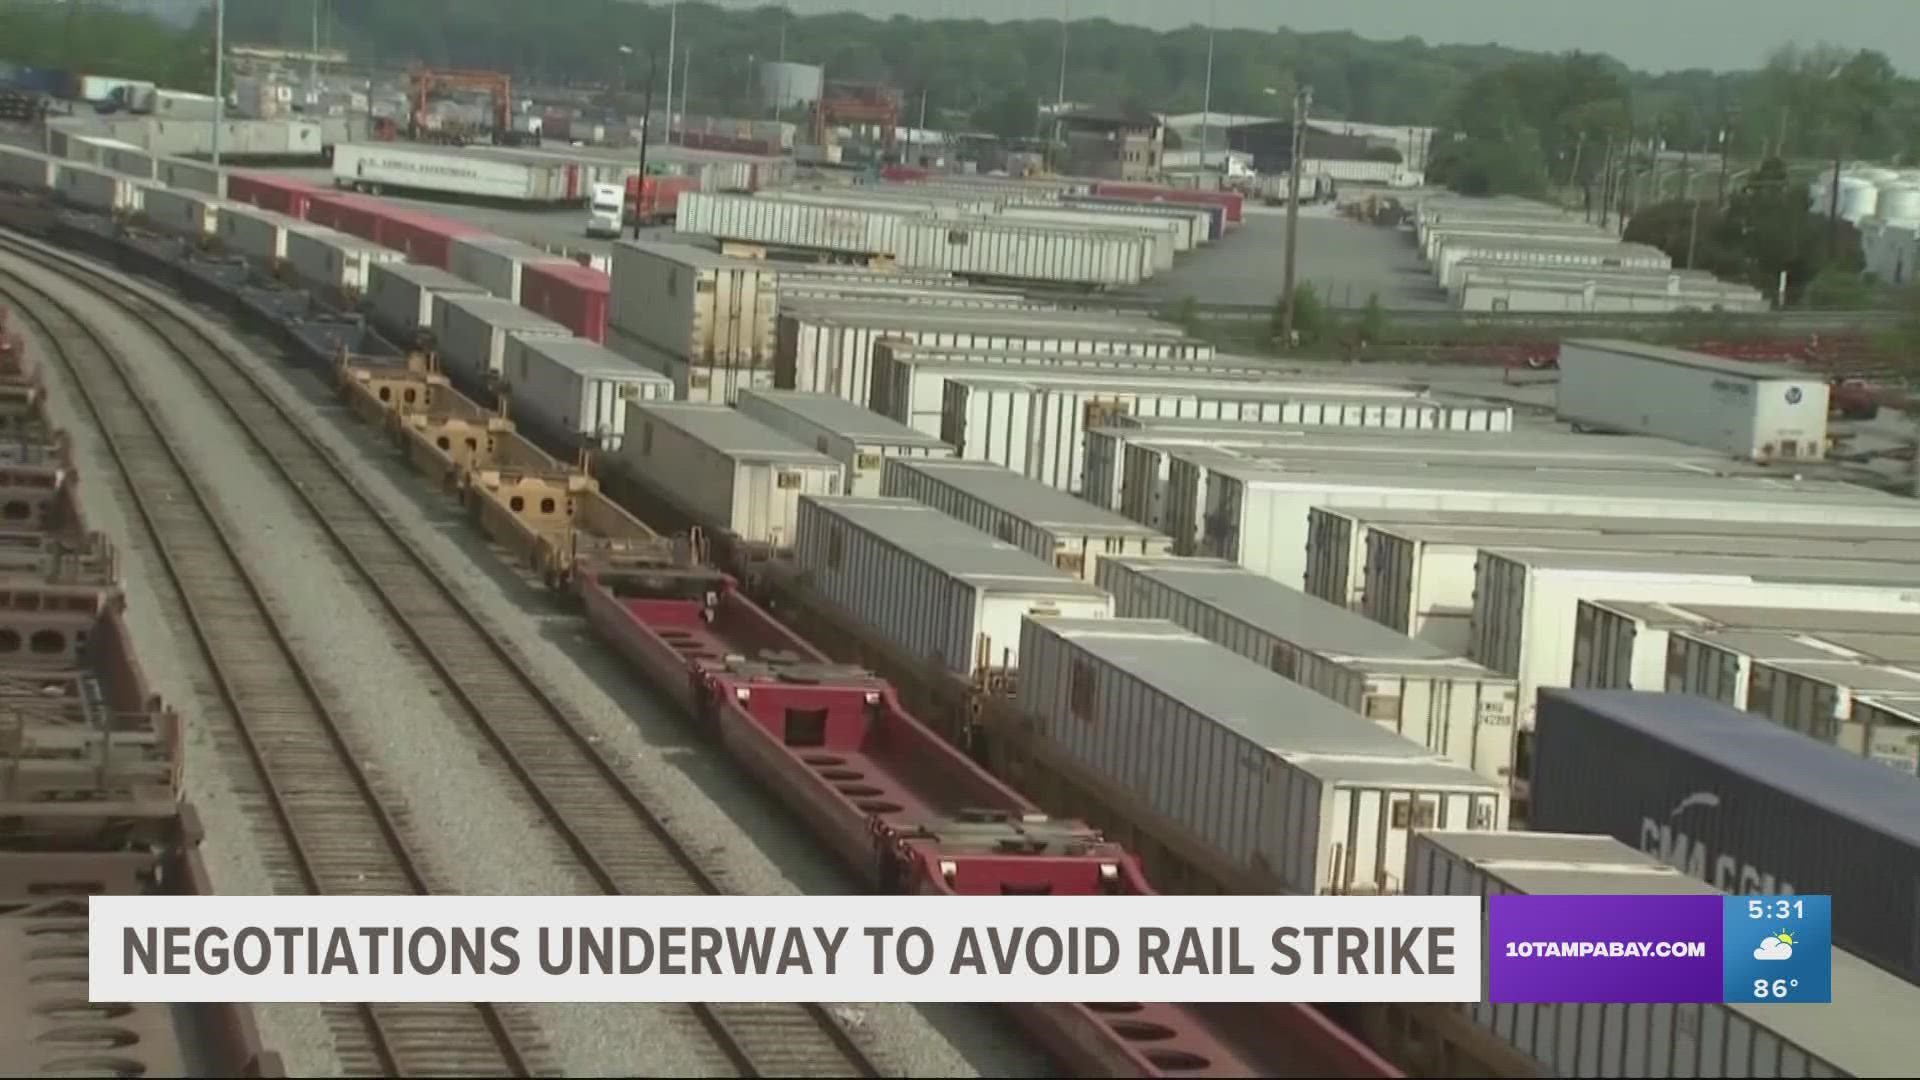 A strike could happen if the railroads and unions can't settle their differences before an early Friday walkout deadline.